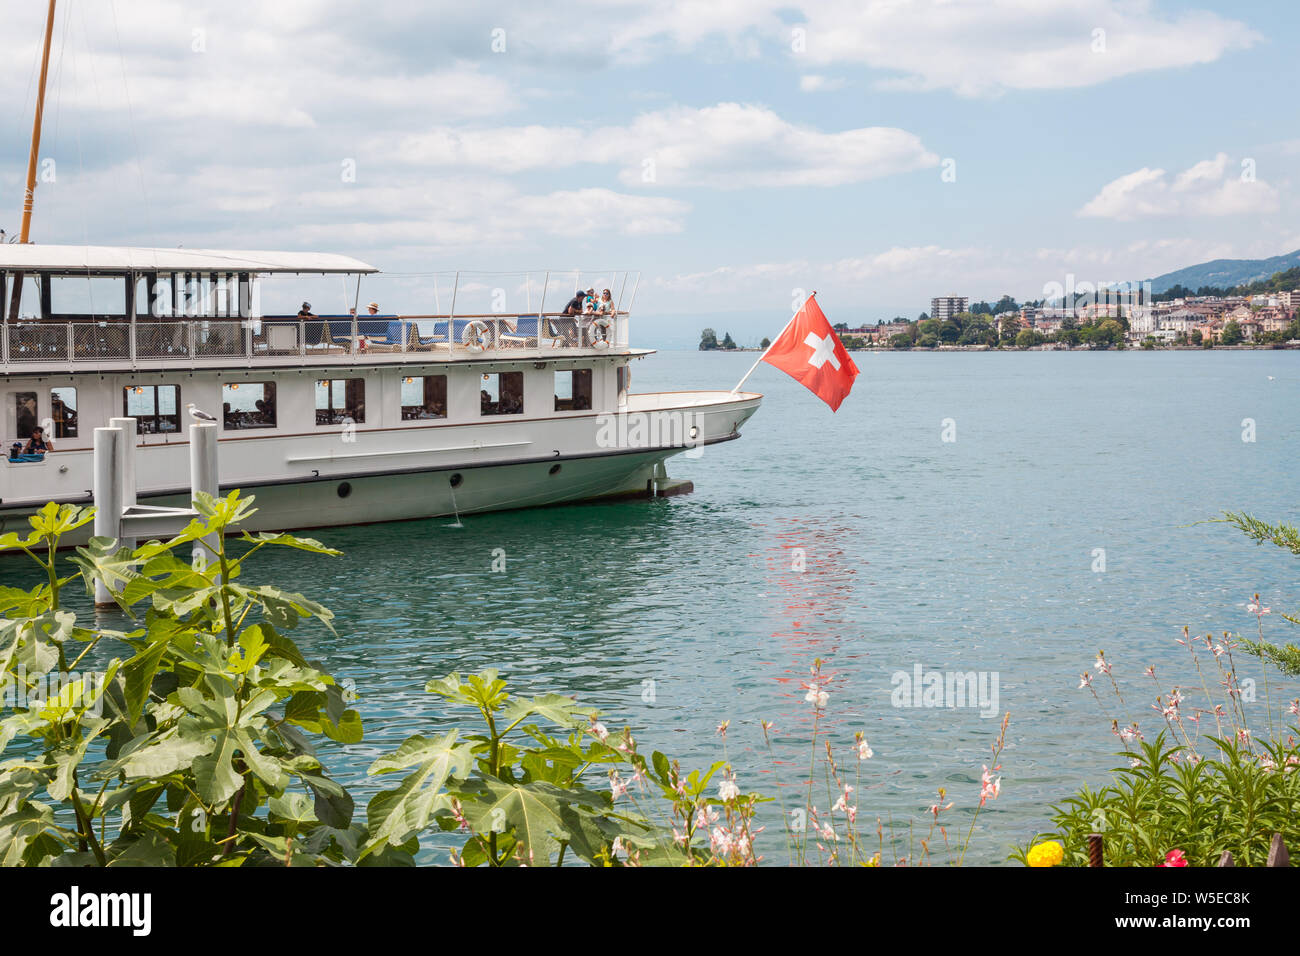 The Belle Epoque retro paddle boat with Swiss flag at the stern moored in Montreux, Lake Geneva (lac Leman), Vaud, Switzerland on sunny summer day Stock Photo